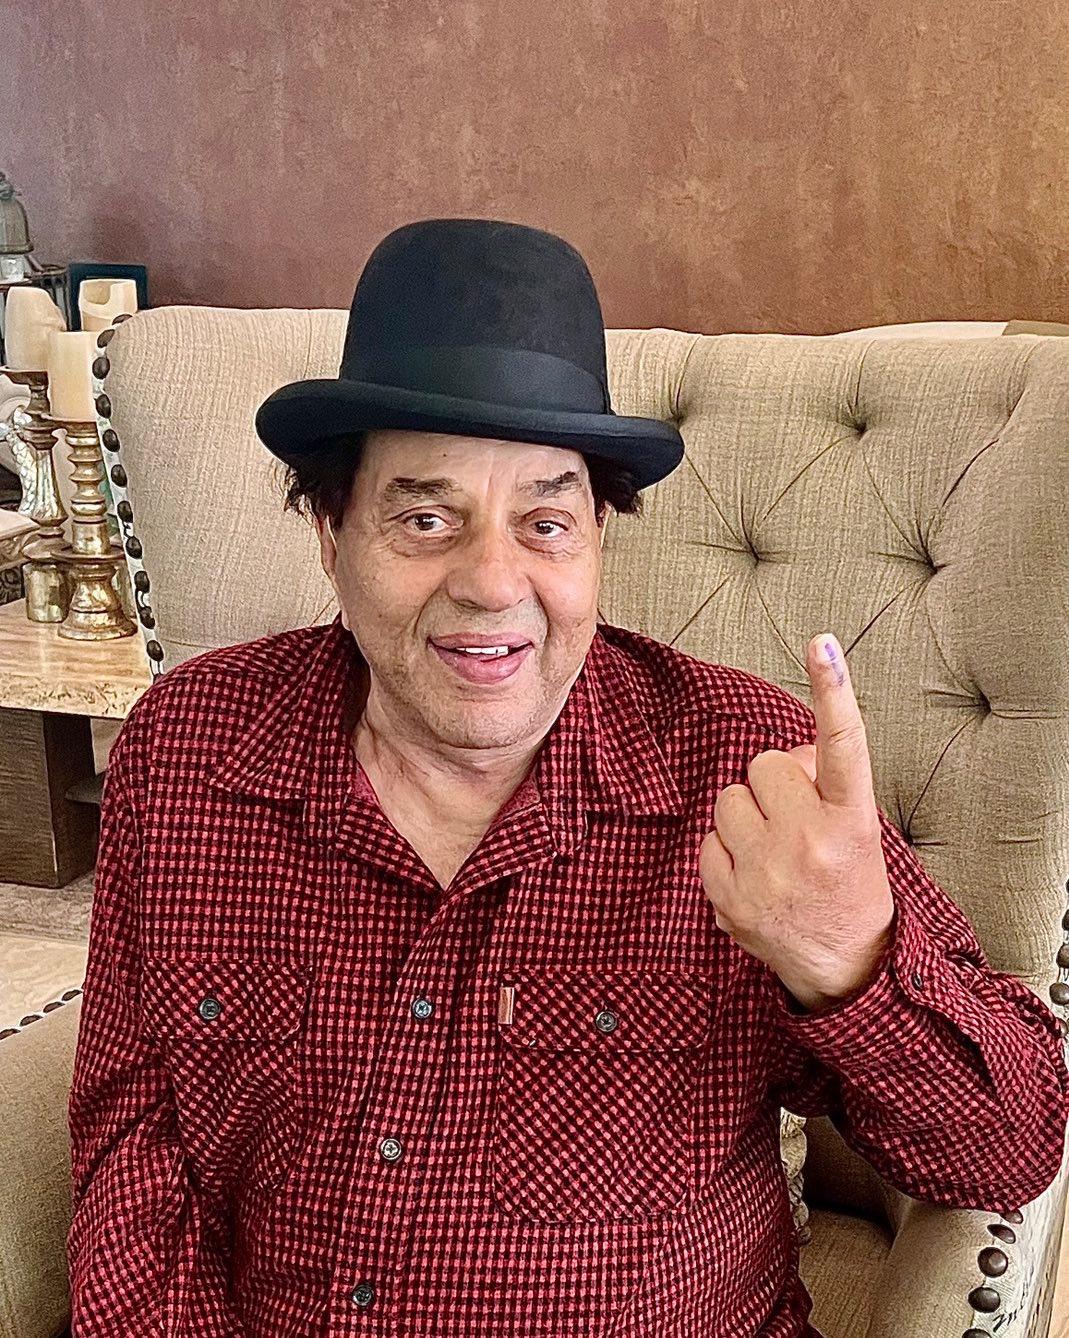 Dharmendra while sharing a picture wrote, 